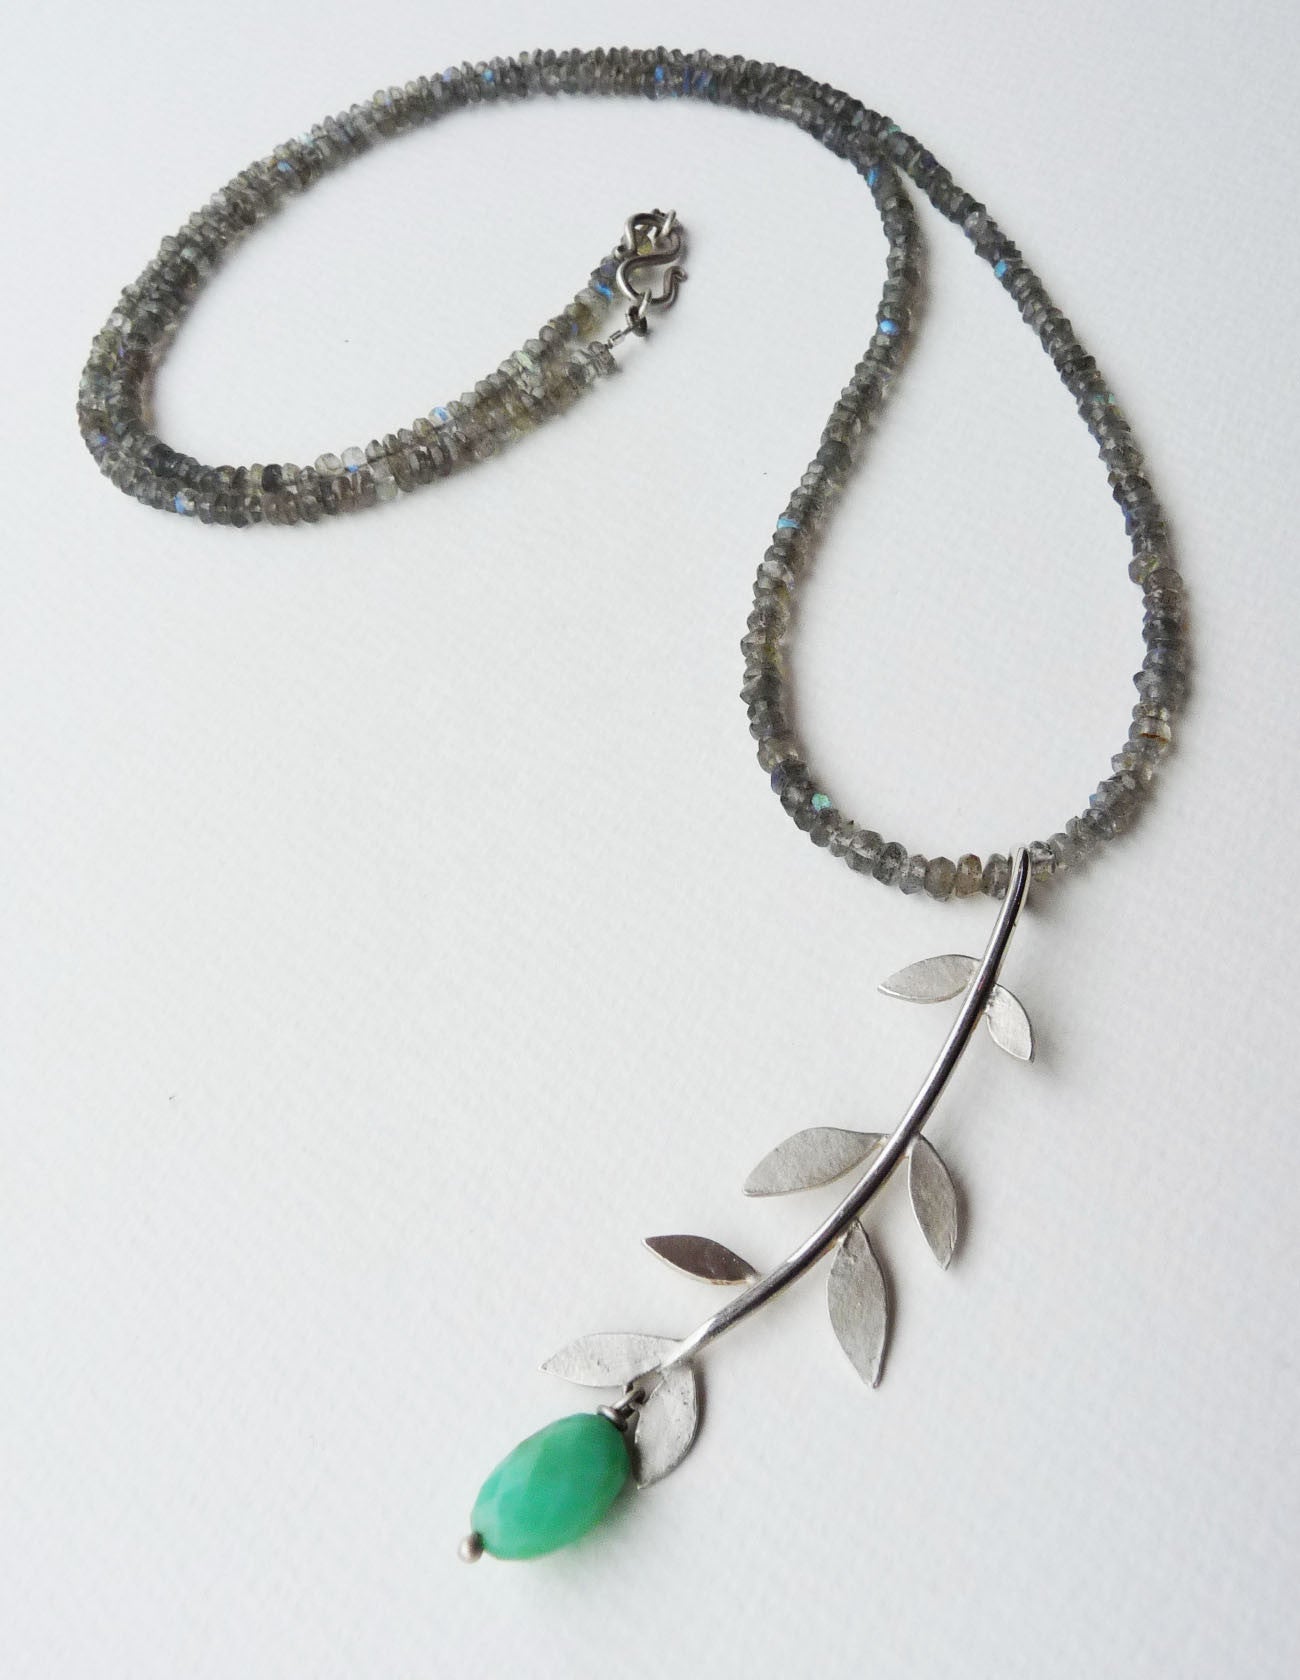 blossoming, branch, sterling, silver, necklace, handmade, jewellery, jewelry, leaf, leaves, labradorite, chrysoprase, long, nature, natural